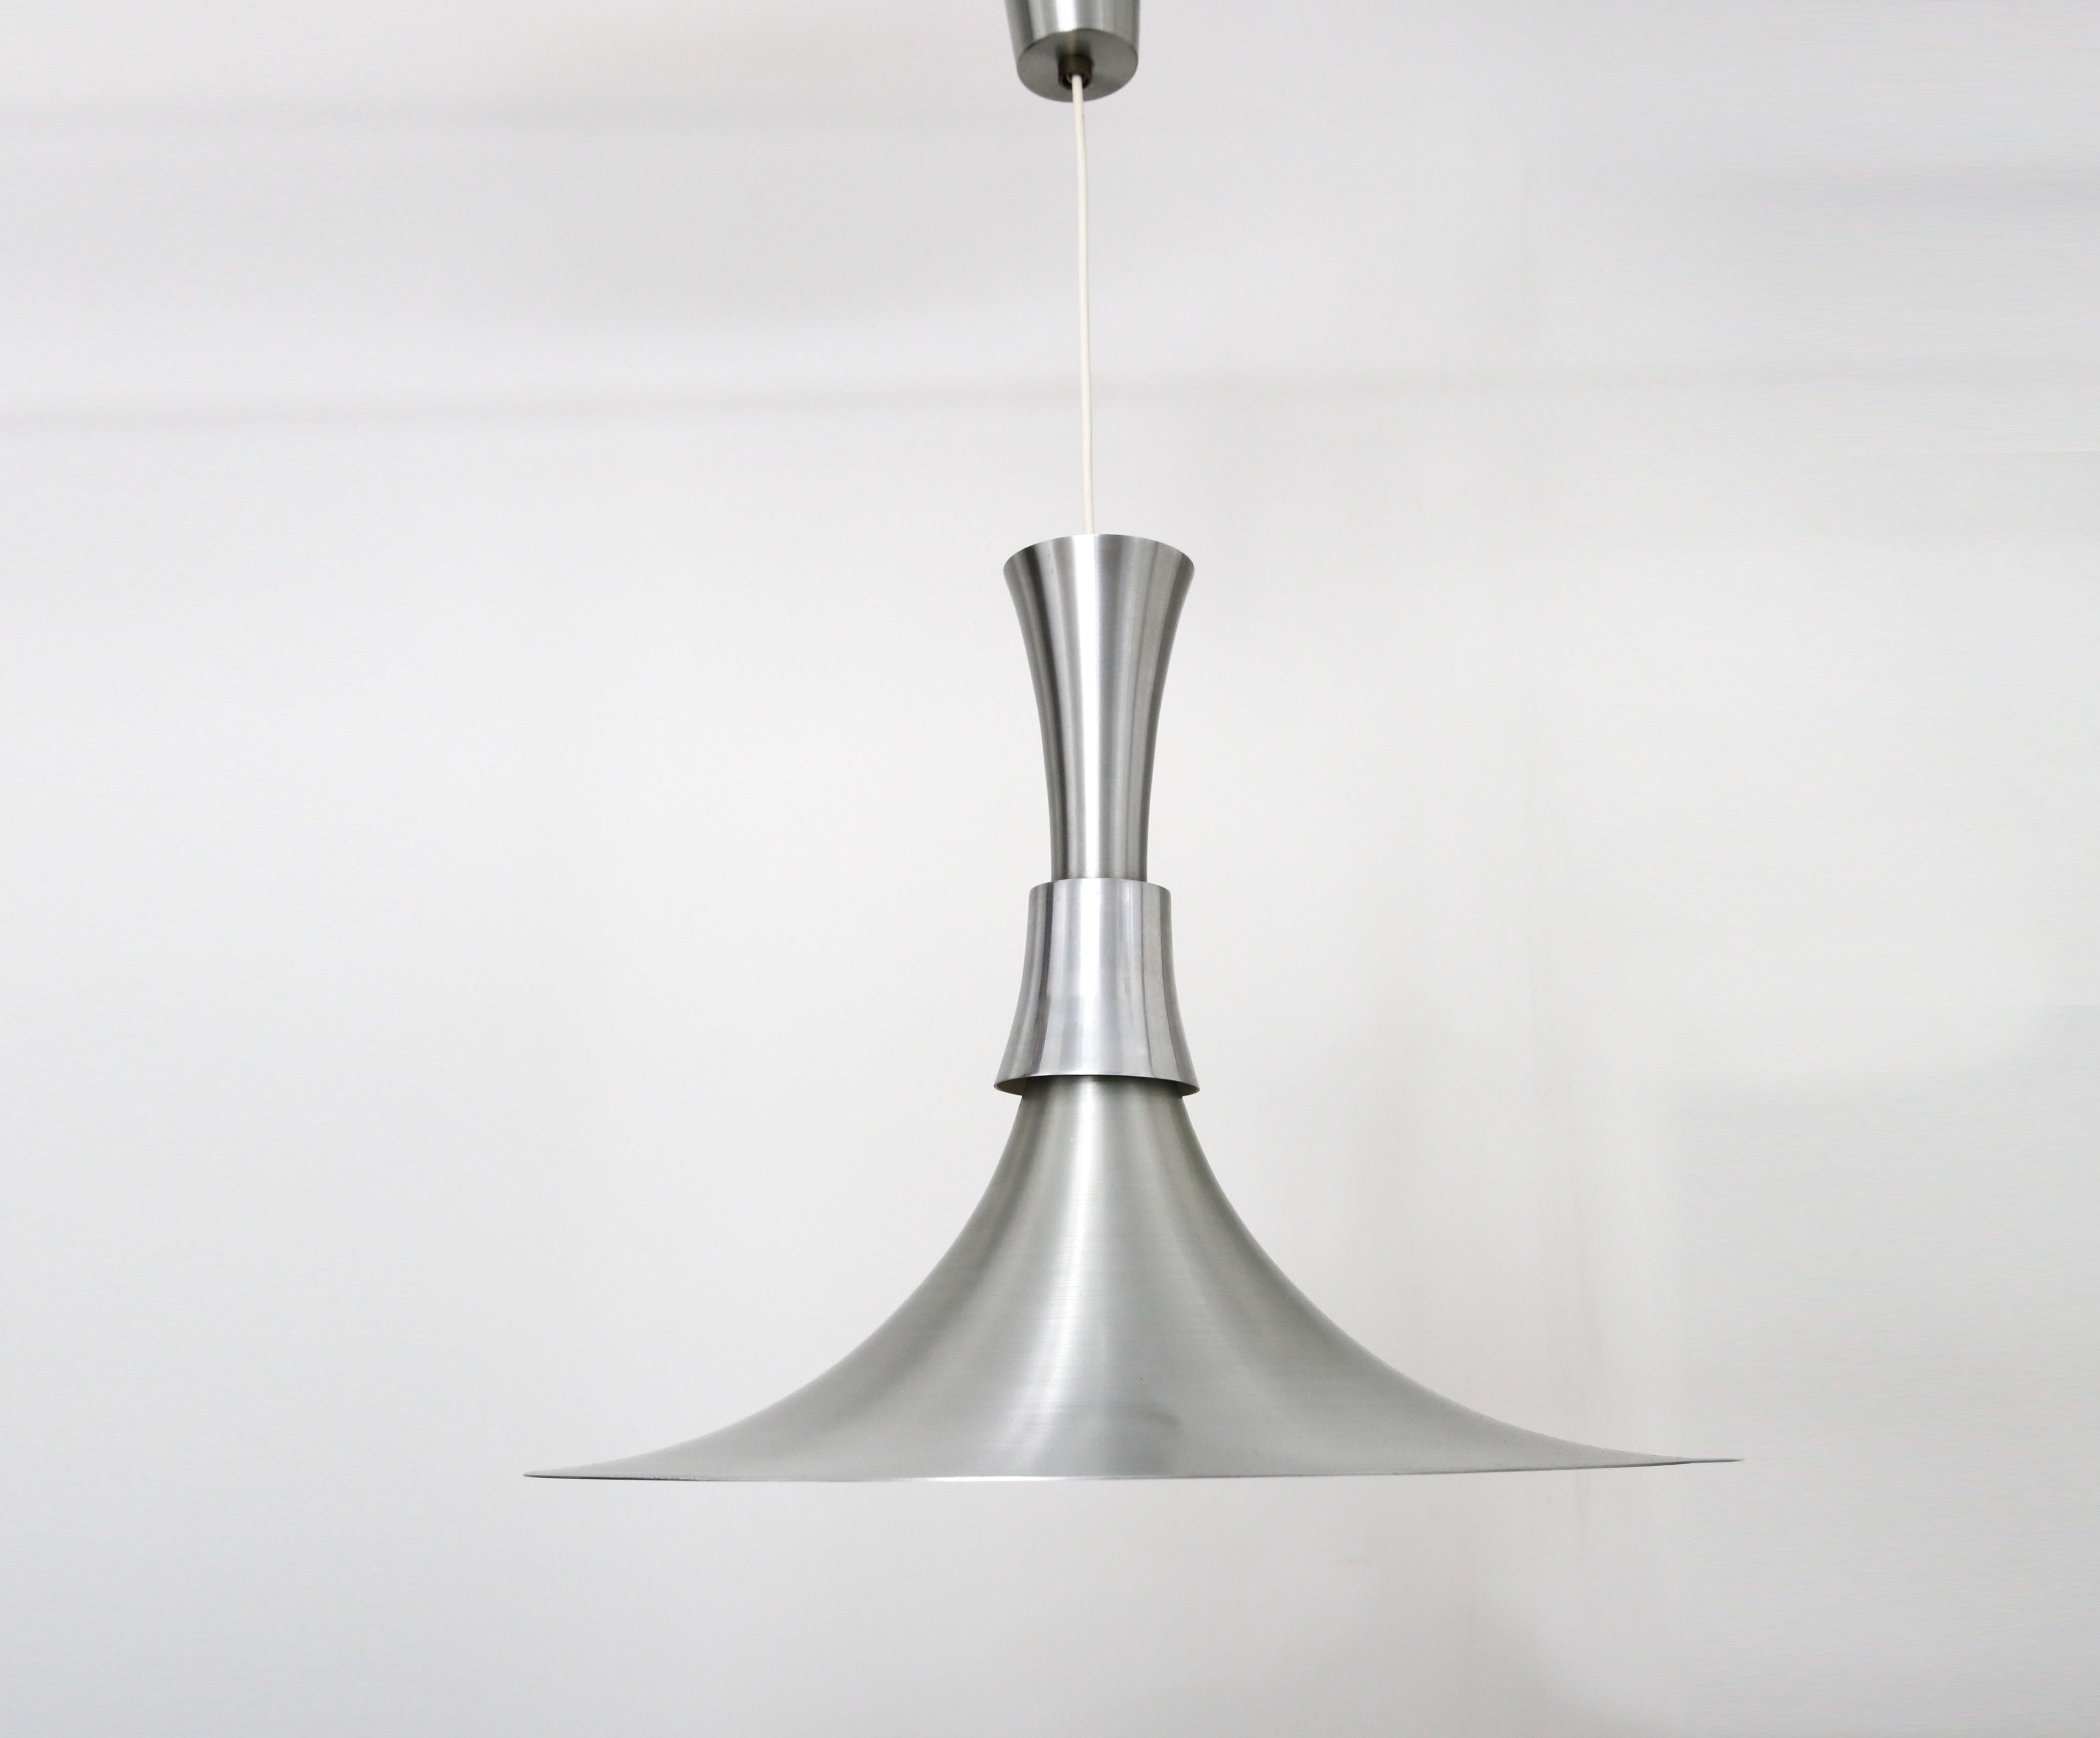 Fabulous Mid Century pendant ceiling light by Bent Nordsted for Lyskaer Belysning

Trumpet shaped ceiling pendant light in spun aluminium, with a wide base and a middle collar of polished aluminium. The original matching ceiling fitting is also